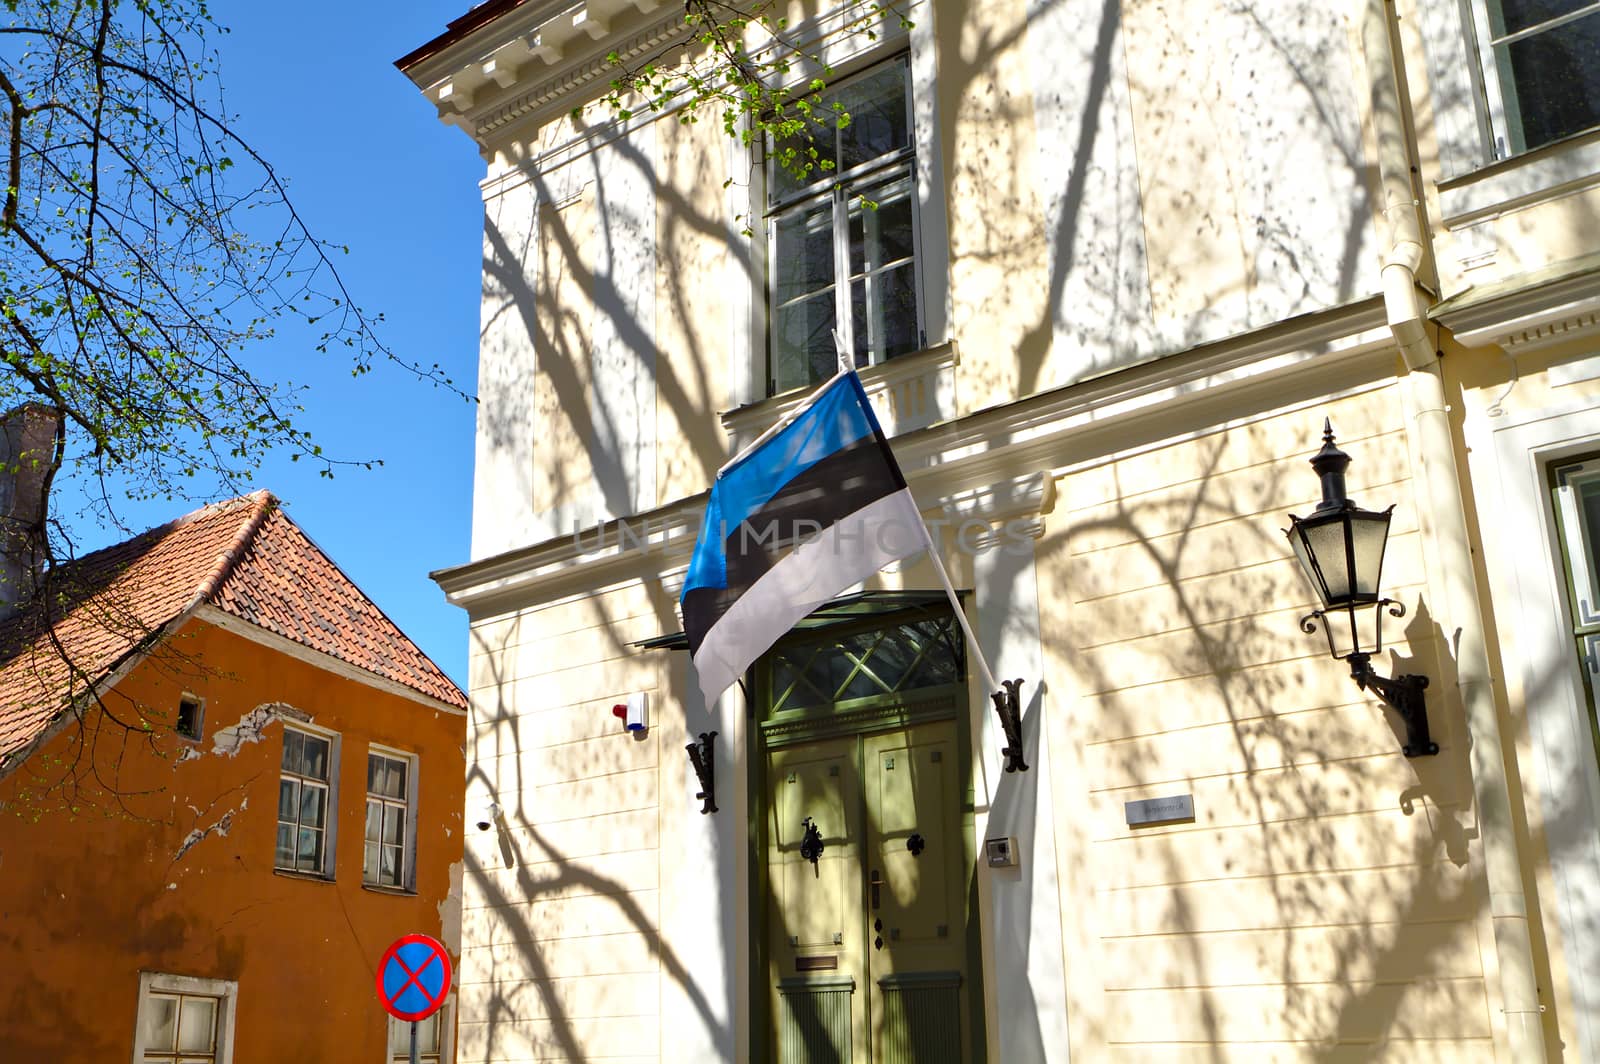 Estonian flag on the wall of a building in the Old Town Tallinn. Beige wall of an old building covered with shadows of a trees. Flag hanging next to the door.